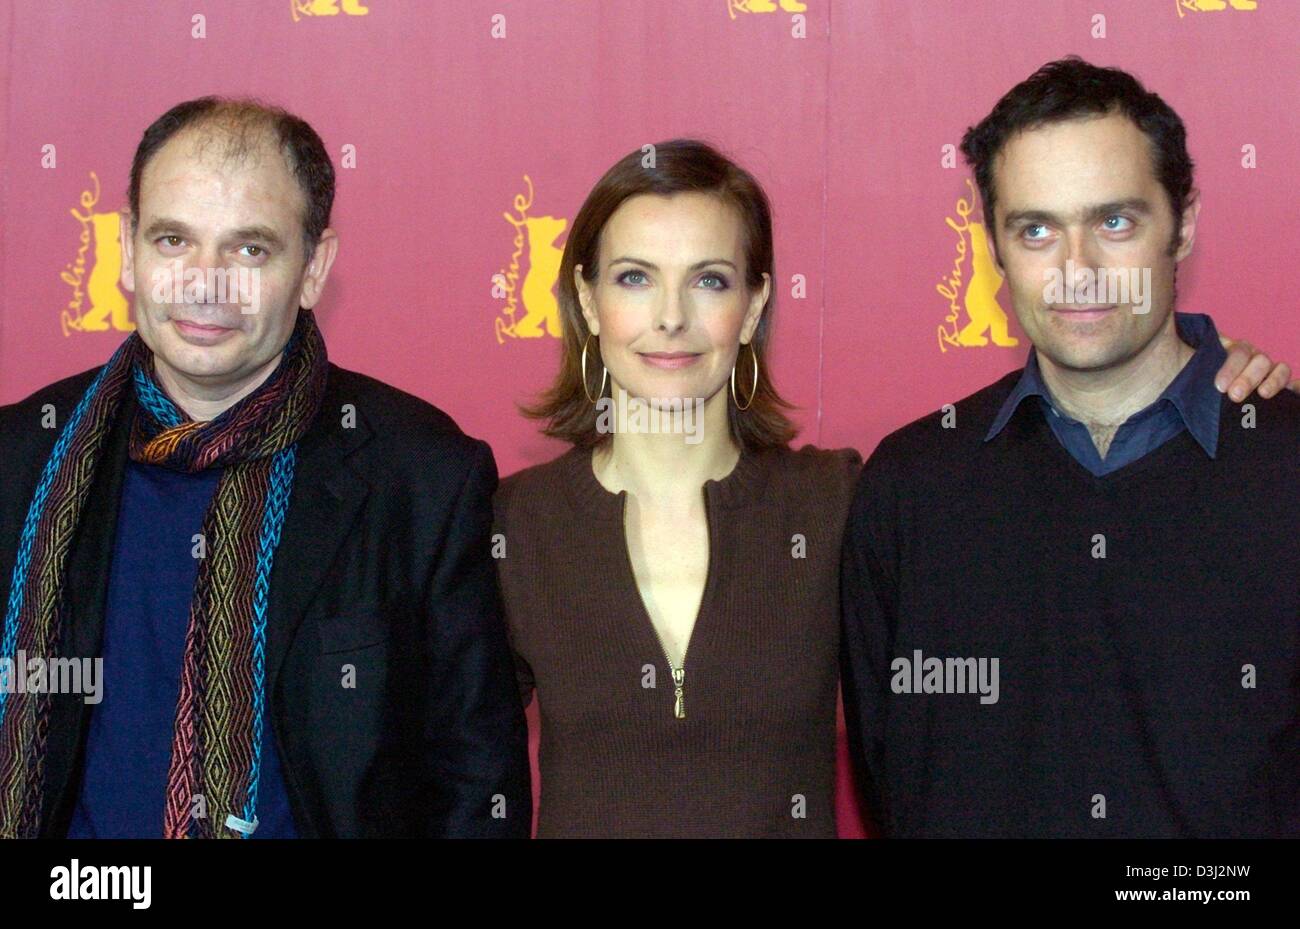 (dpa) - French film director Cedric Kahn (R) and French actors Carole Bouquet (C) and Jean-Pierre Darroussin stand next to each other and smile at a press conference during the 54th International Film Festival in Berlin, 10 February 2004. They presented their film 'Feux rouges' (rear lights) which will participate in the festival's competition for the 'Golden Bear'. The festival ru Stock Photo